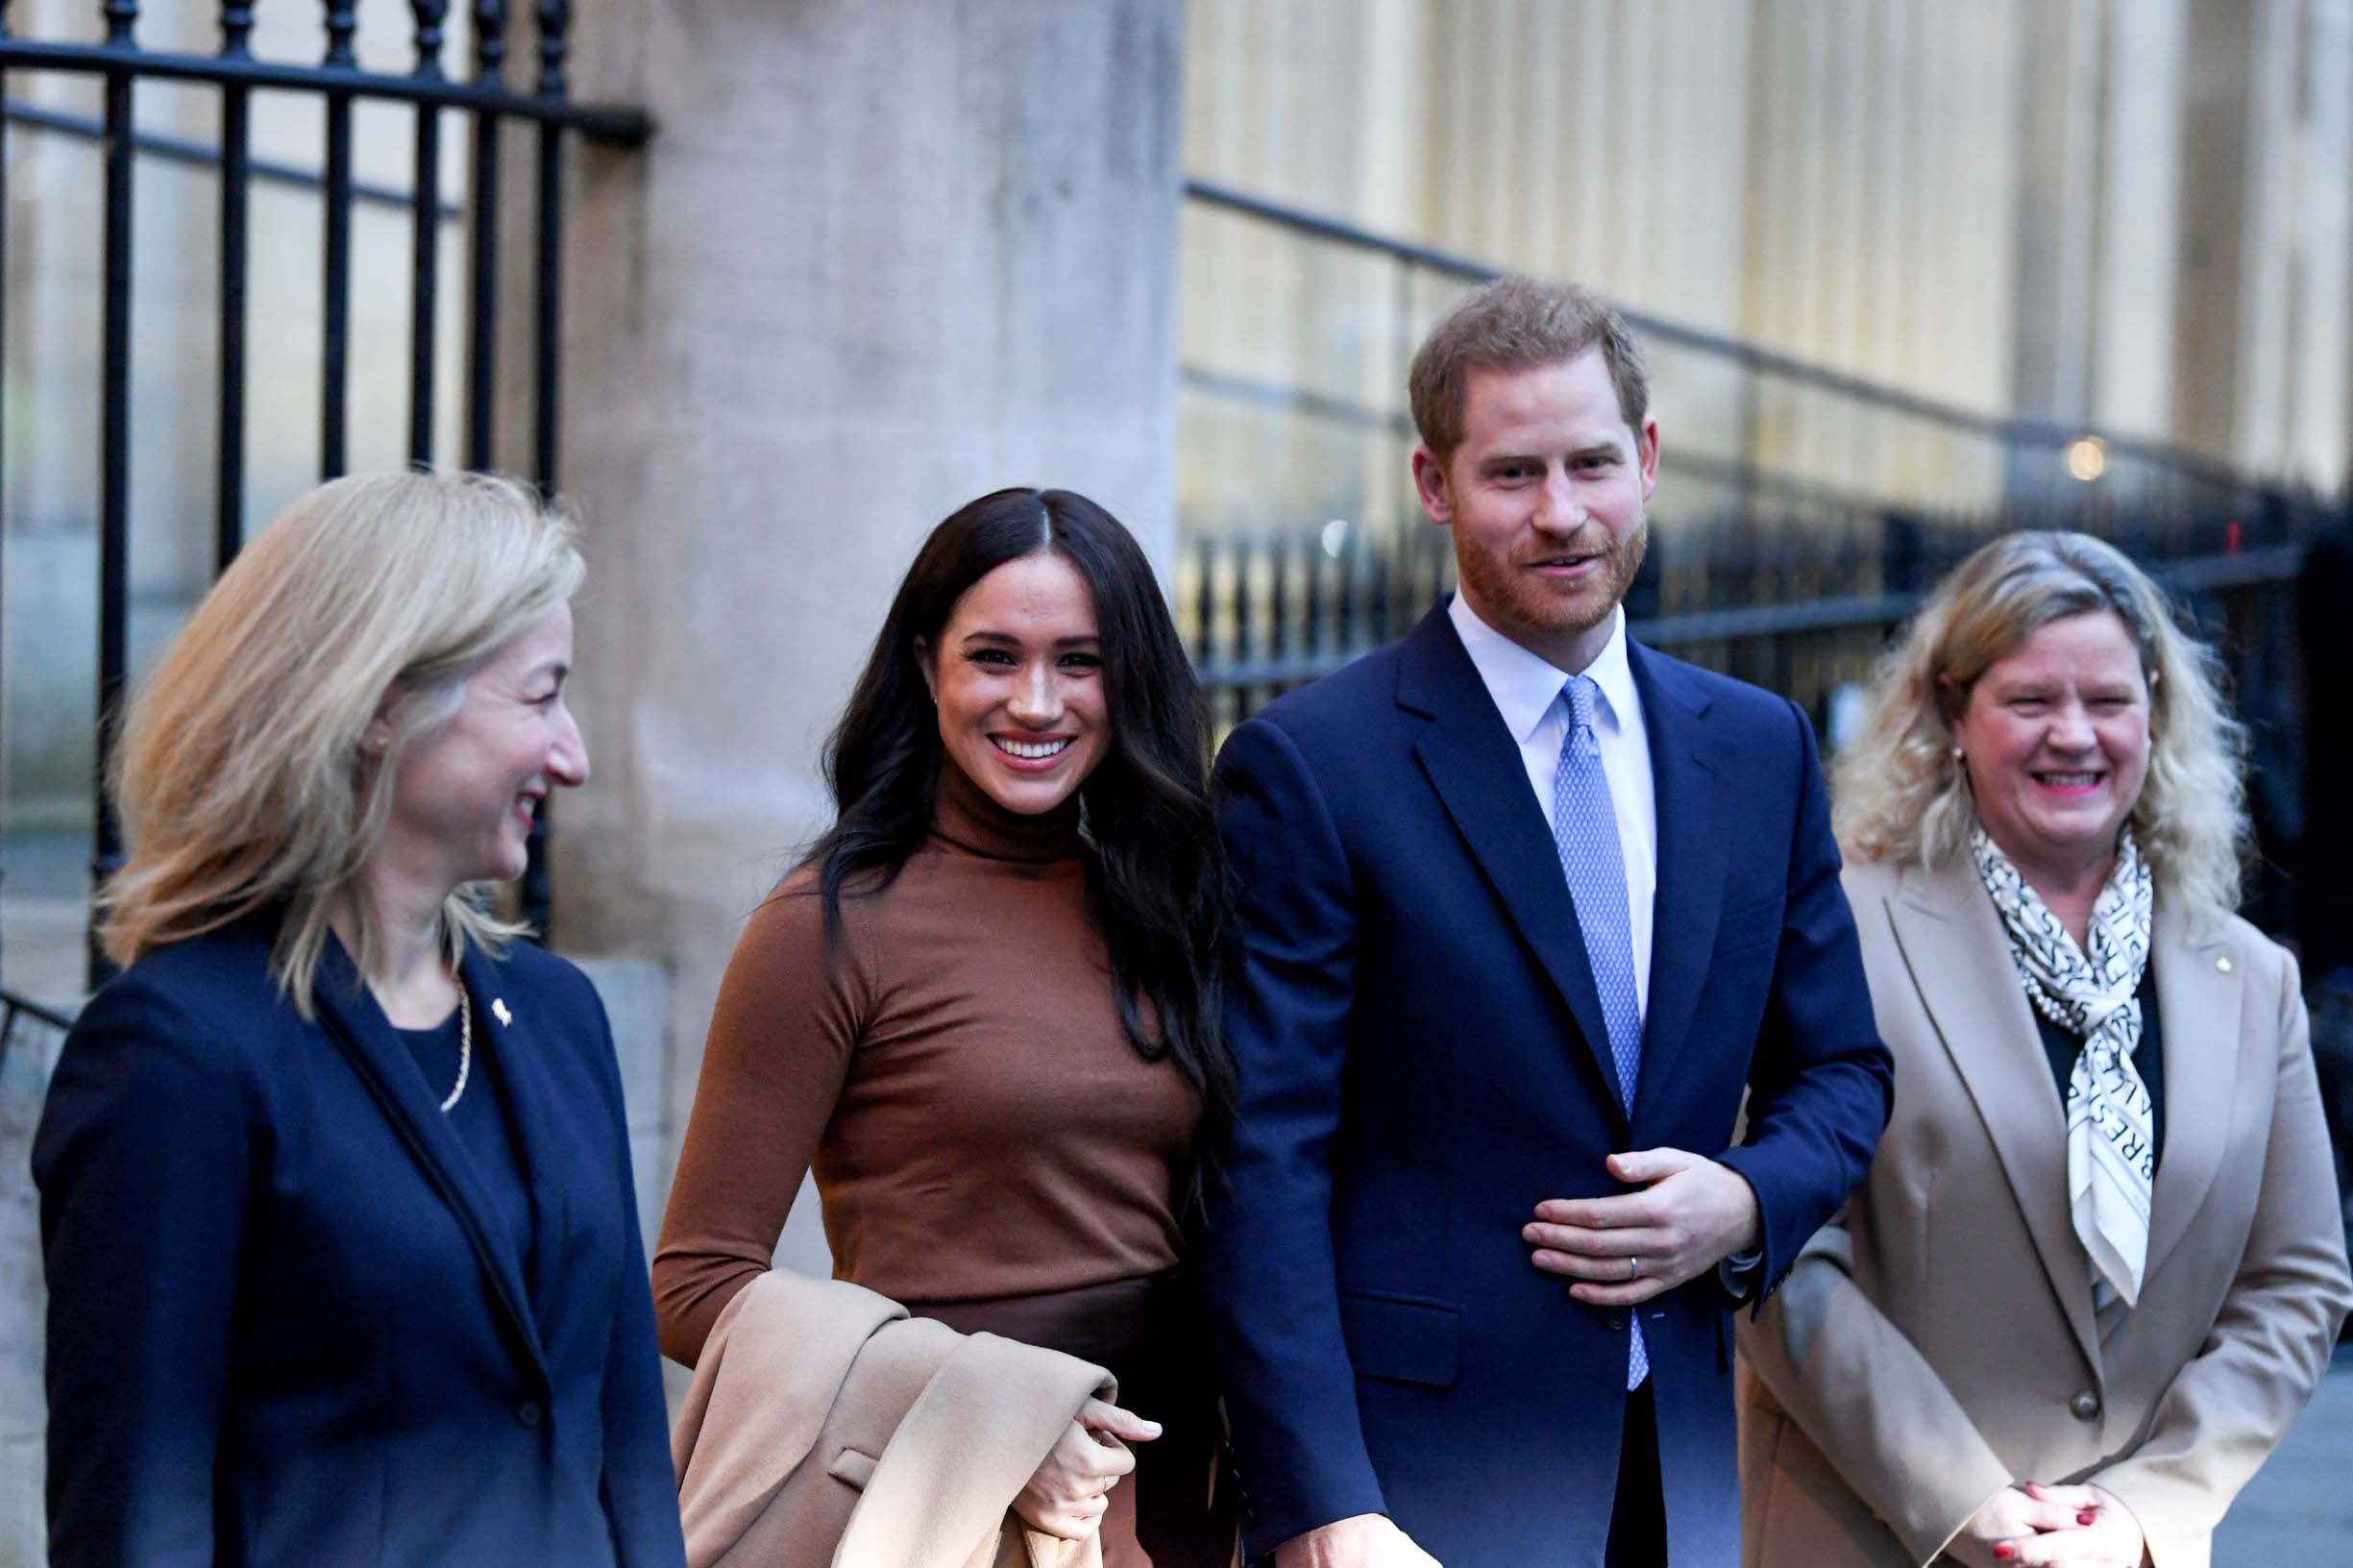 LONDON, UNITED KINGDOM - JANUARY 07: Prince Harry, Duke of Sussex and Meghan, Duchess of Sussex stand with the High Commissioner for Canada in the United Kingdom, Janice Charette (R) and the deputy High Commissioner, Sarah Fountain Smith (L), as they leave after their visit to Canada House in thanks for the warm Canadian hospitality and support they received during their recent stay in Canada, on January 7, 2020 in London, England. (Photo by DANIEL LEAL-OLIVAS  - WPA Pool/Getty Images)